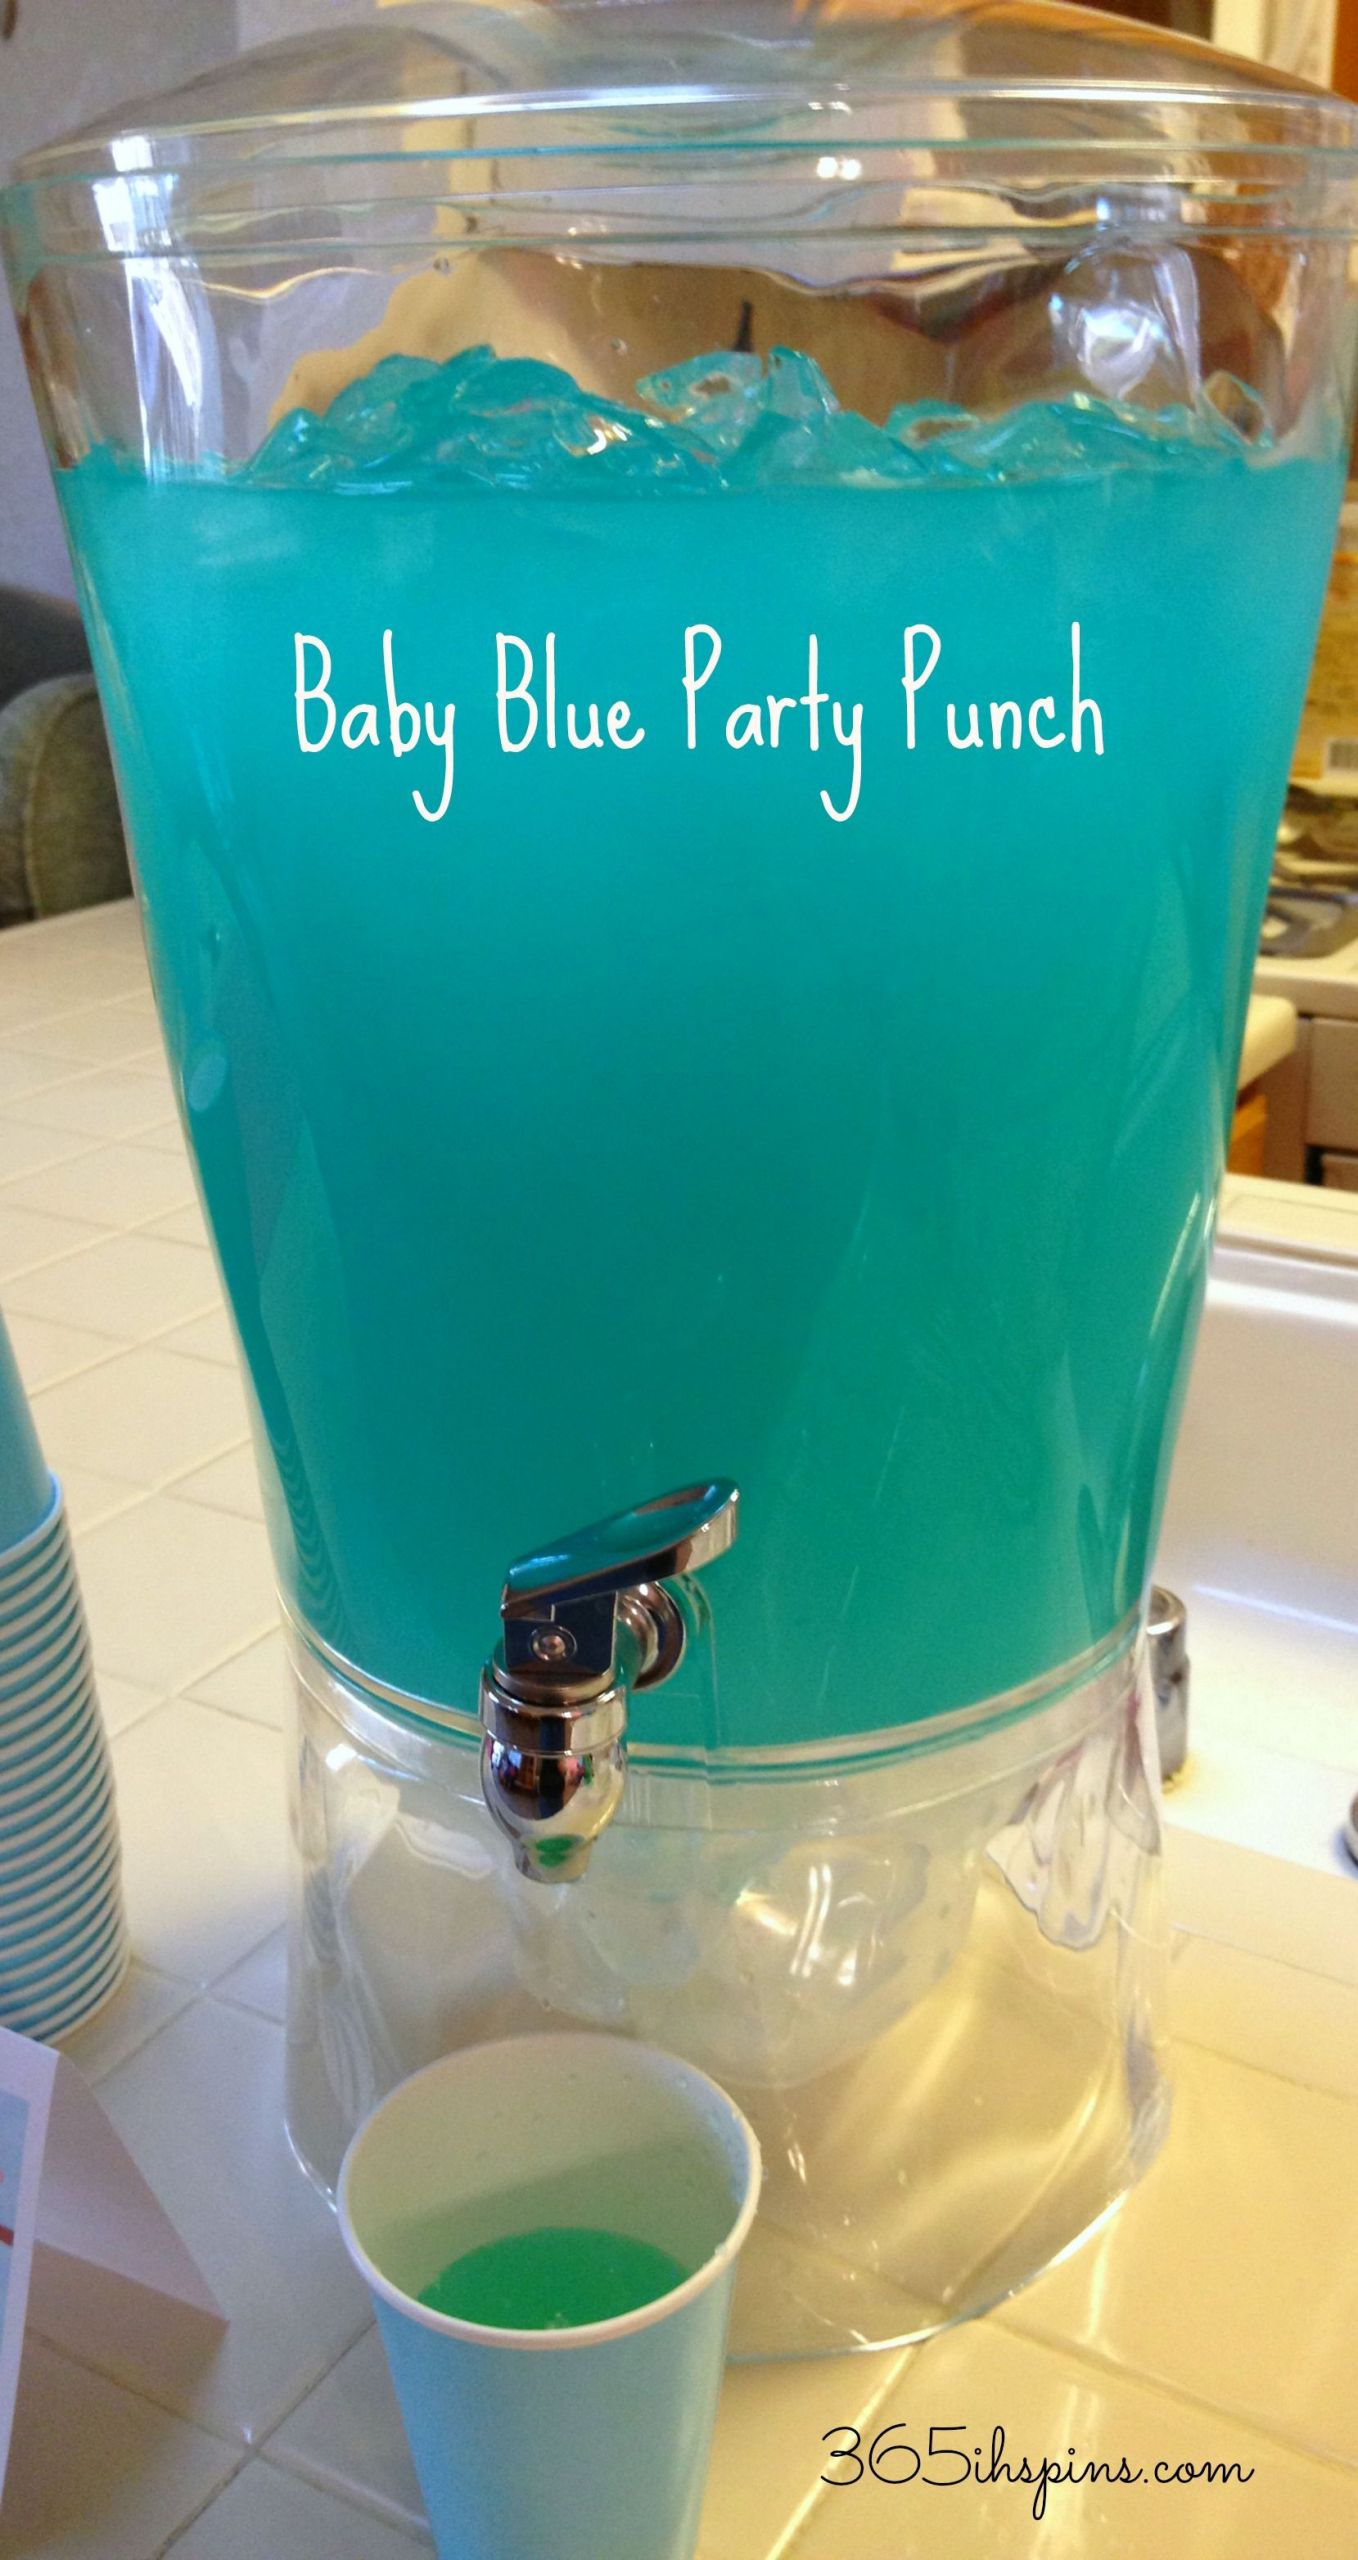 Baby Shower Punch Recipes Blue
 Blue Punch For Baby Shower